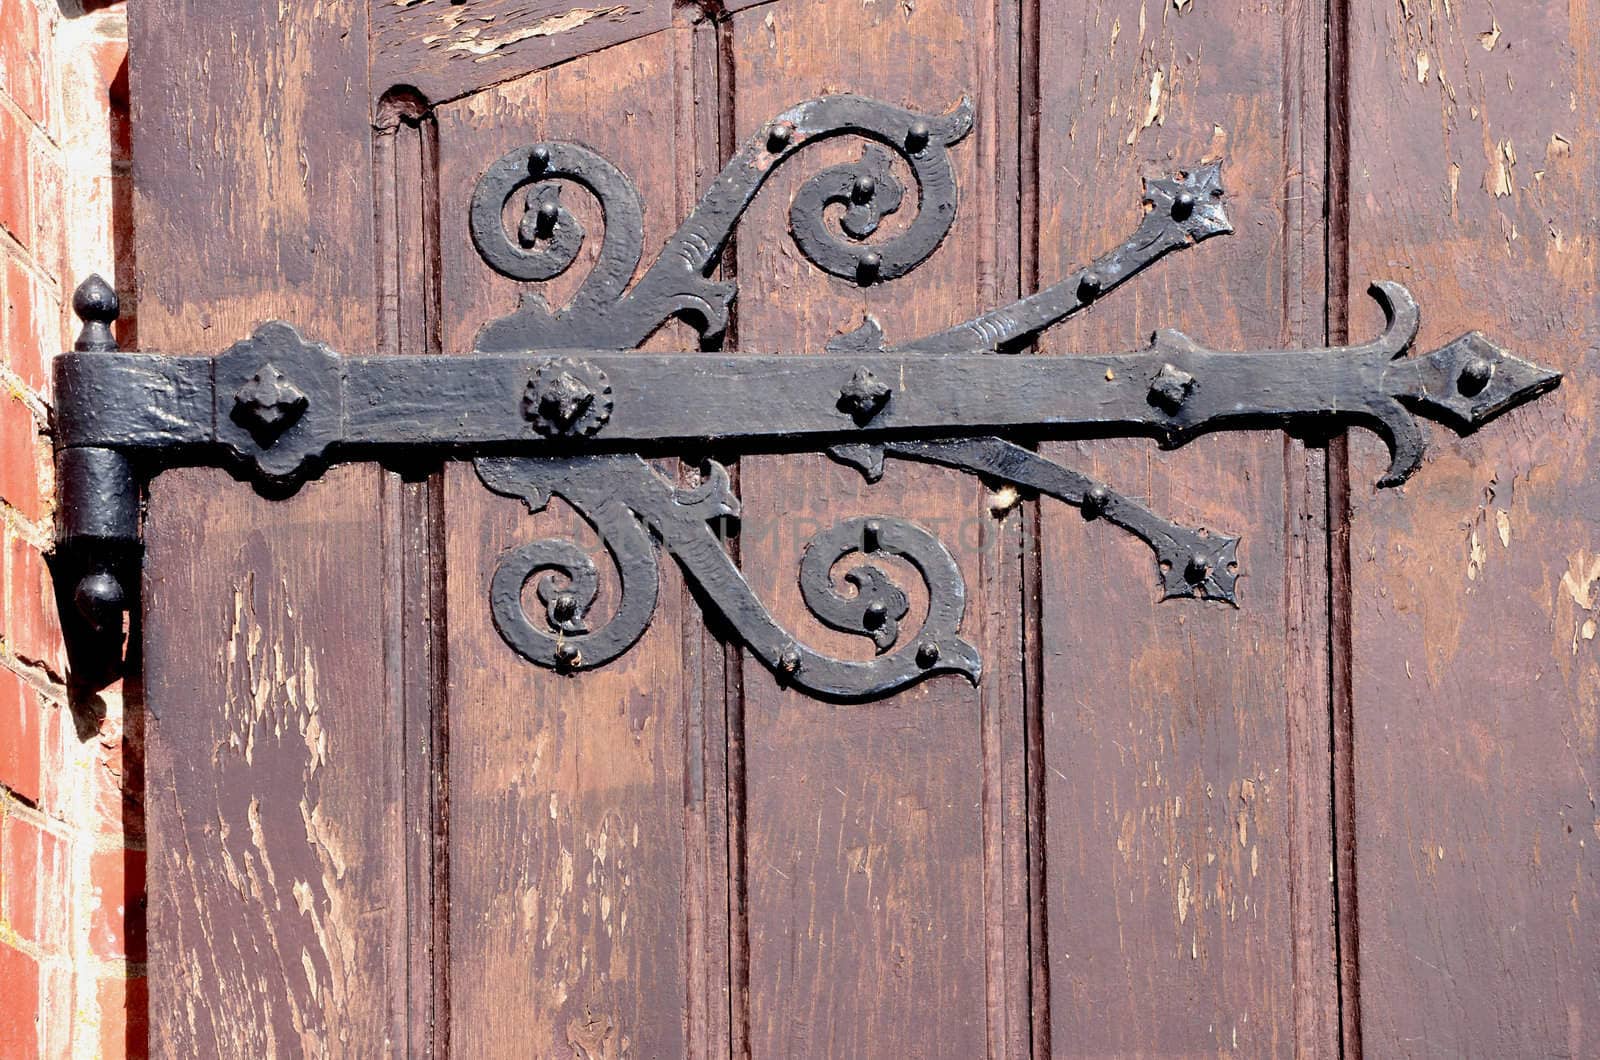 Detail of old decorative hinges holding wooden door. Architectural backdrop fragment.